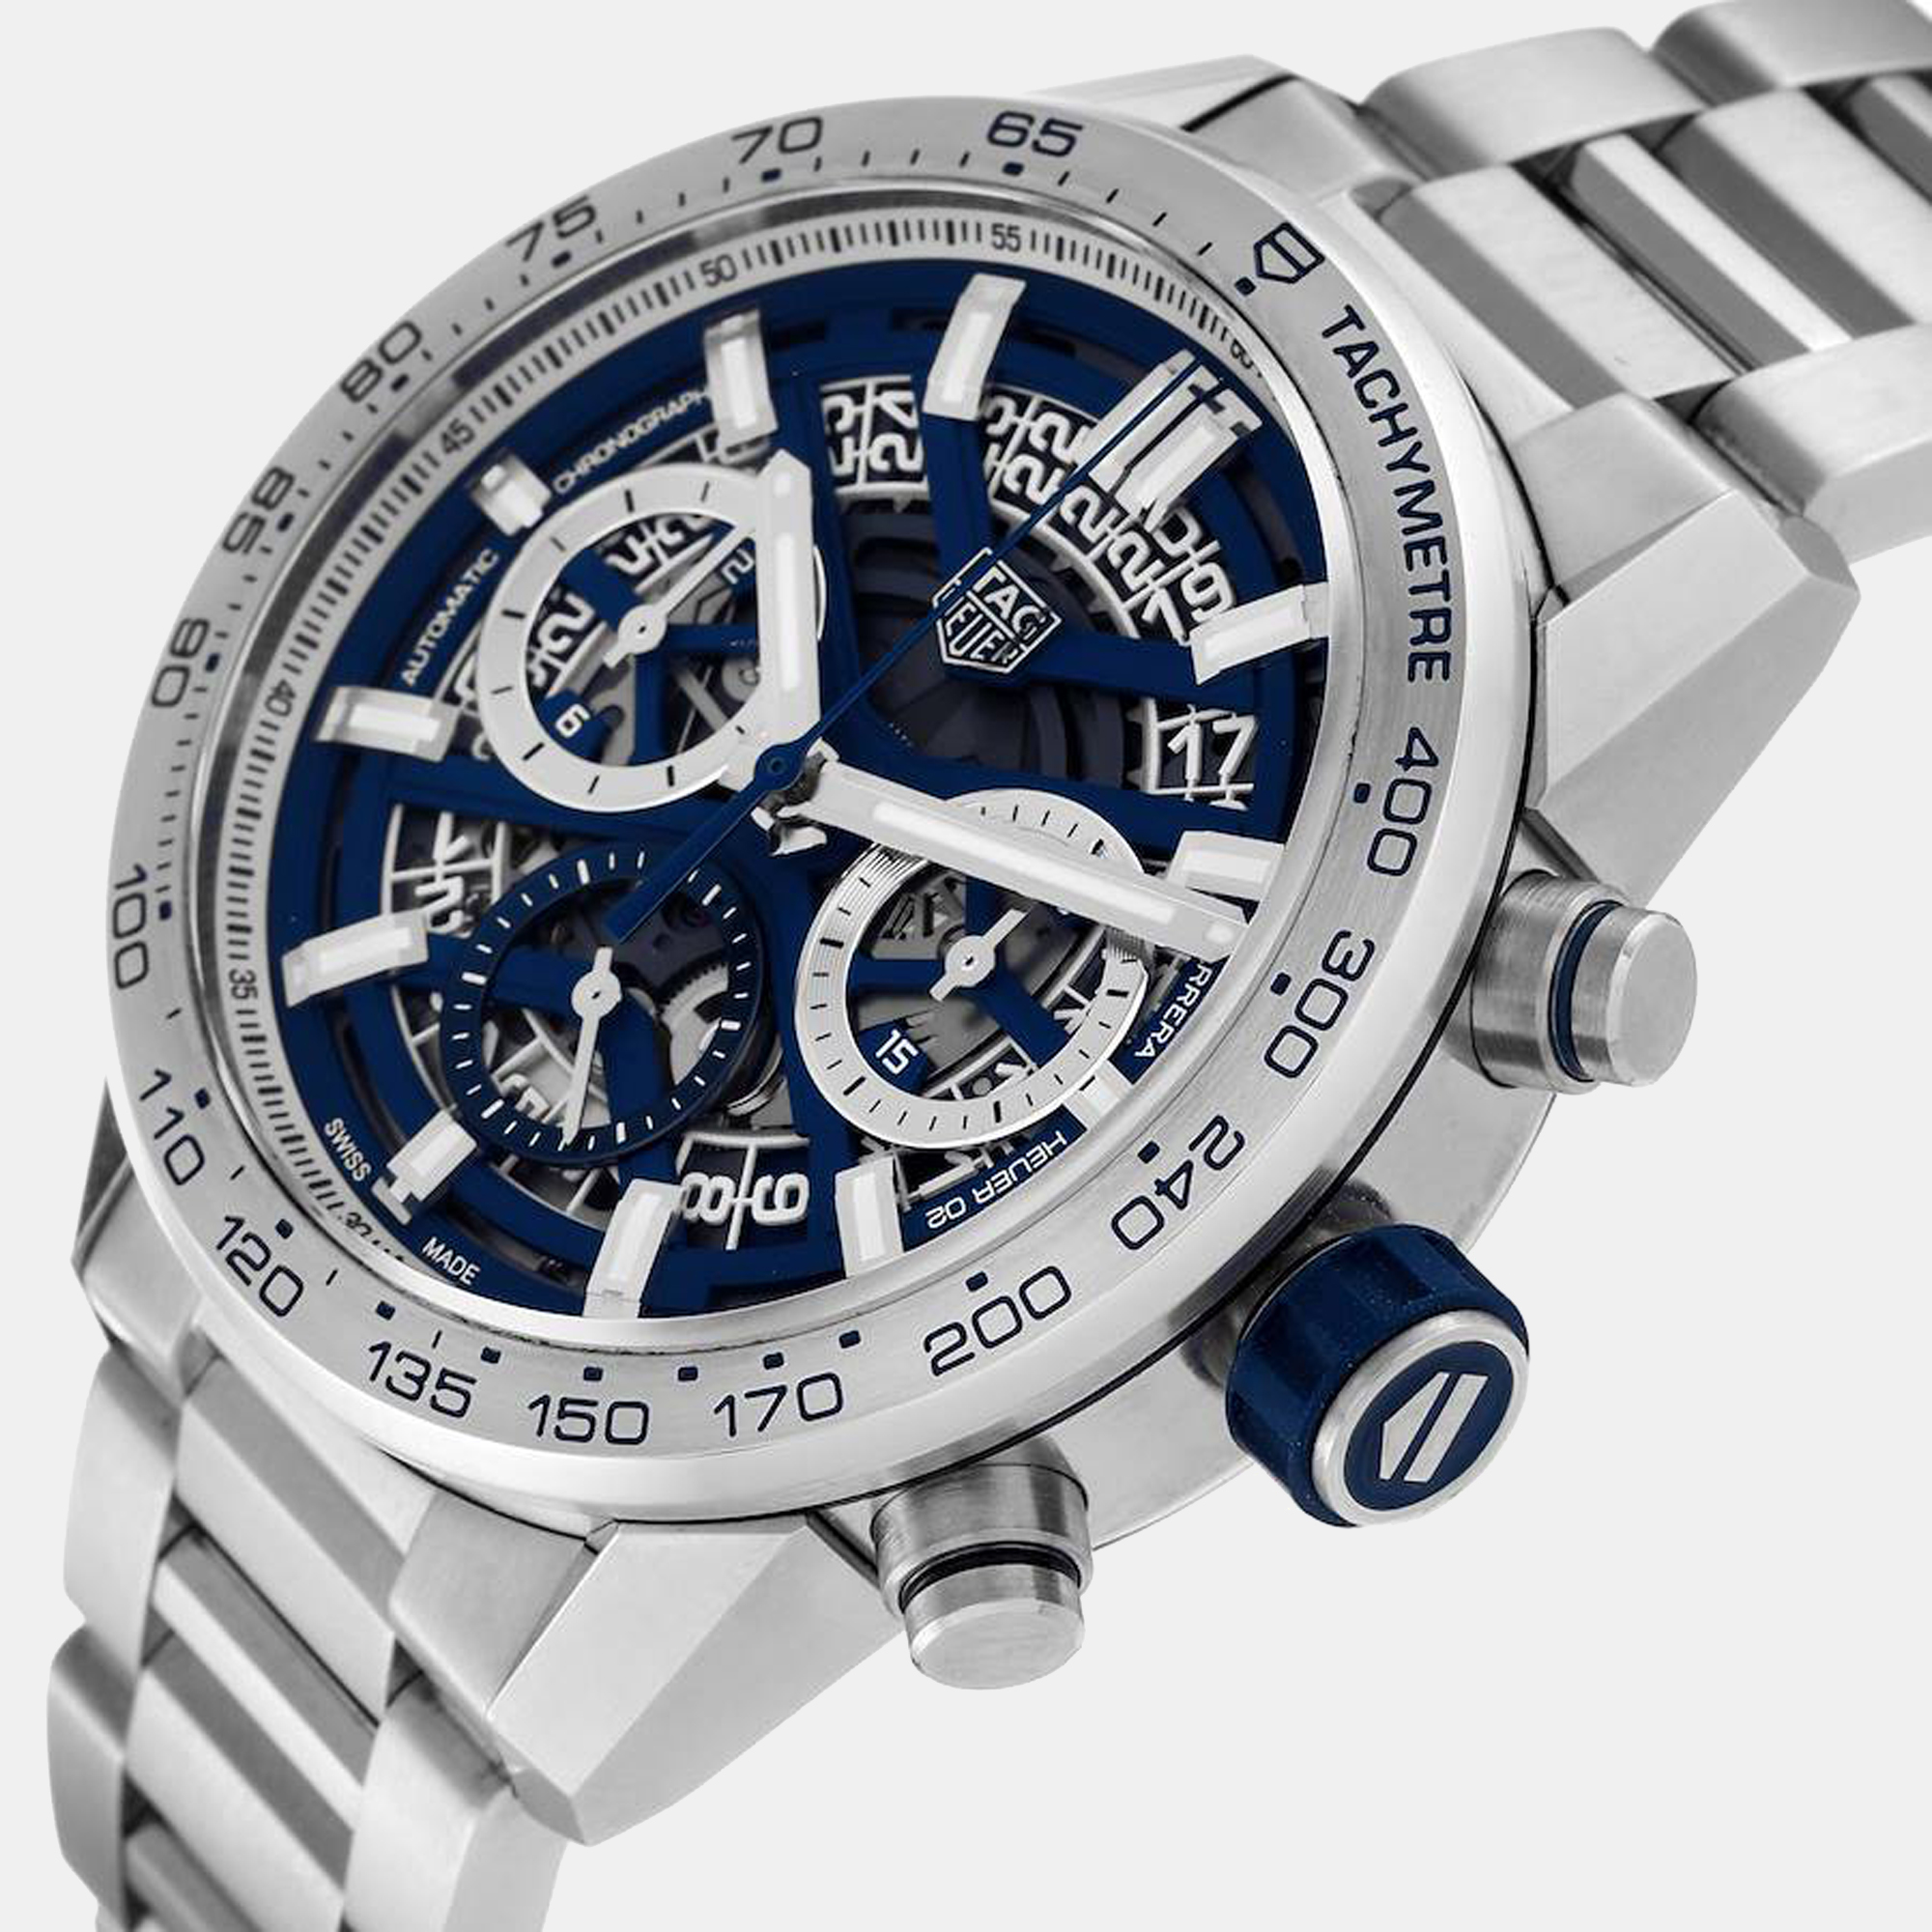 

Tag Heuer Blue Stainless Steel Carrera Skeleton Japan Limited Edition CBG2019 Men's Wristwatch 43 mm